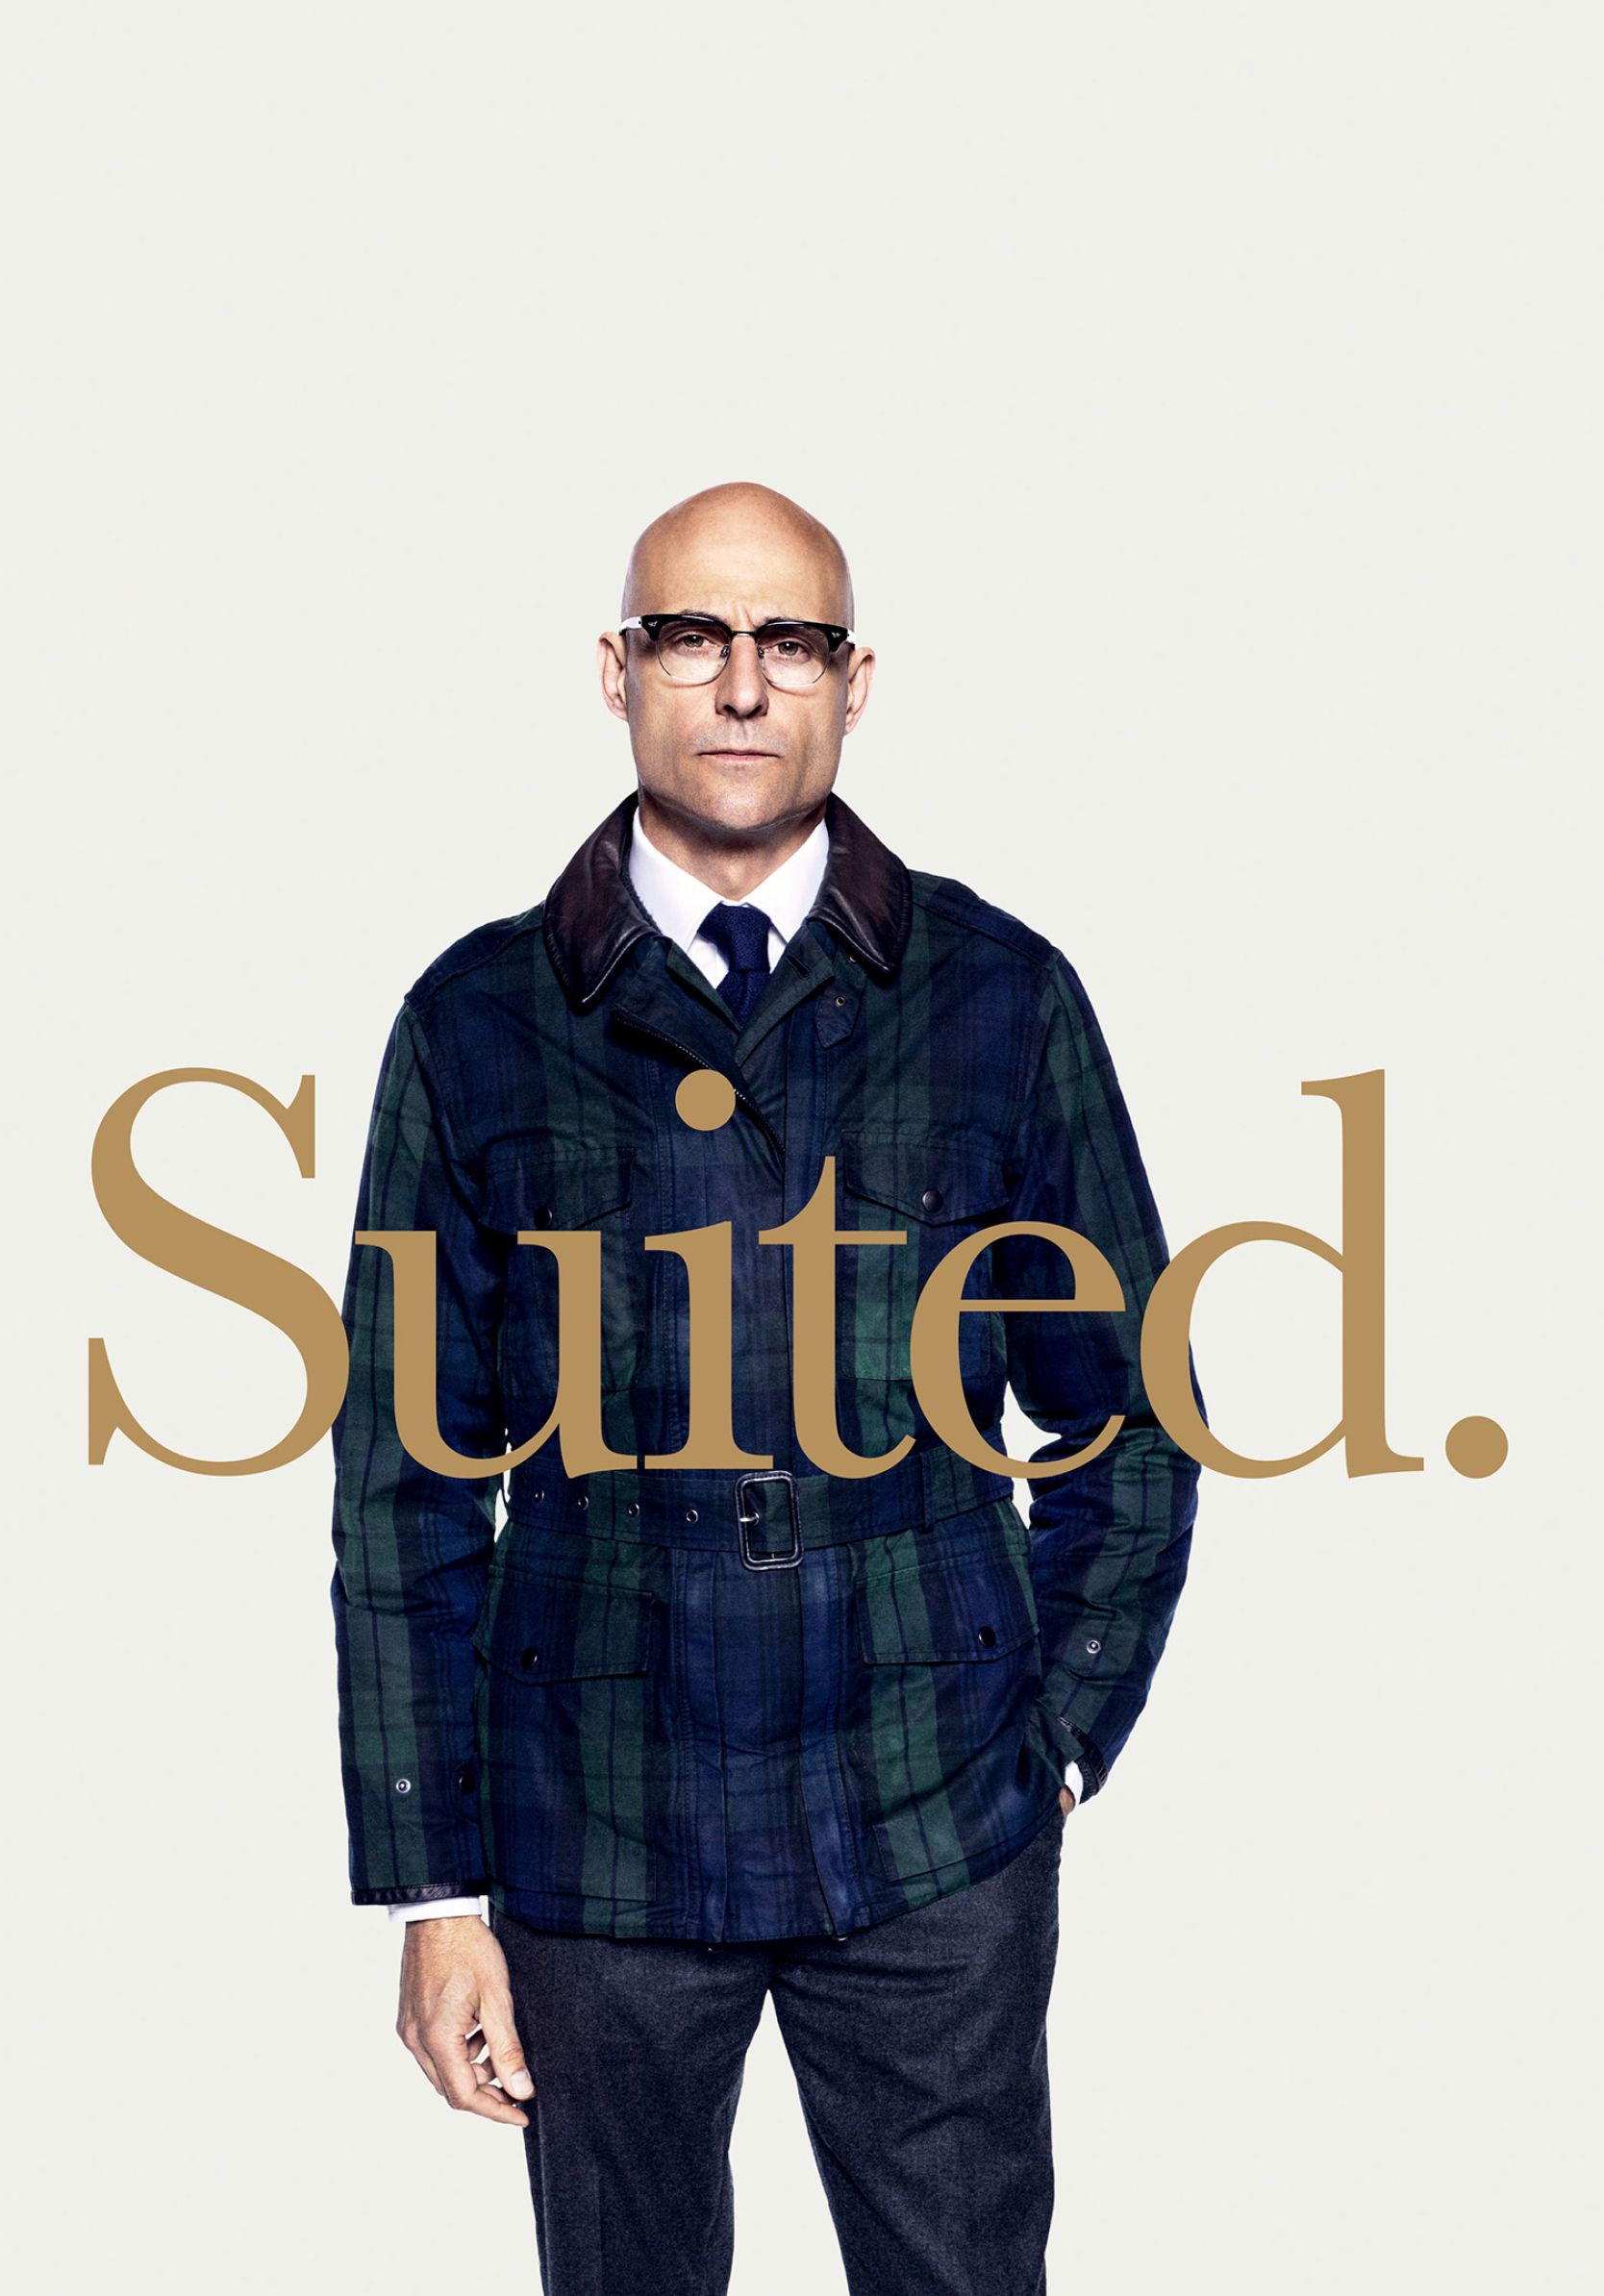 Mark Strong As Merlin Kingsman The Golden Circle 1668x2388 Resolution Wallpaper, HD Movies 4K Wallpaper, Image, Photo and Background